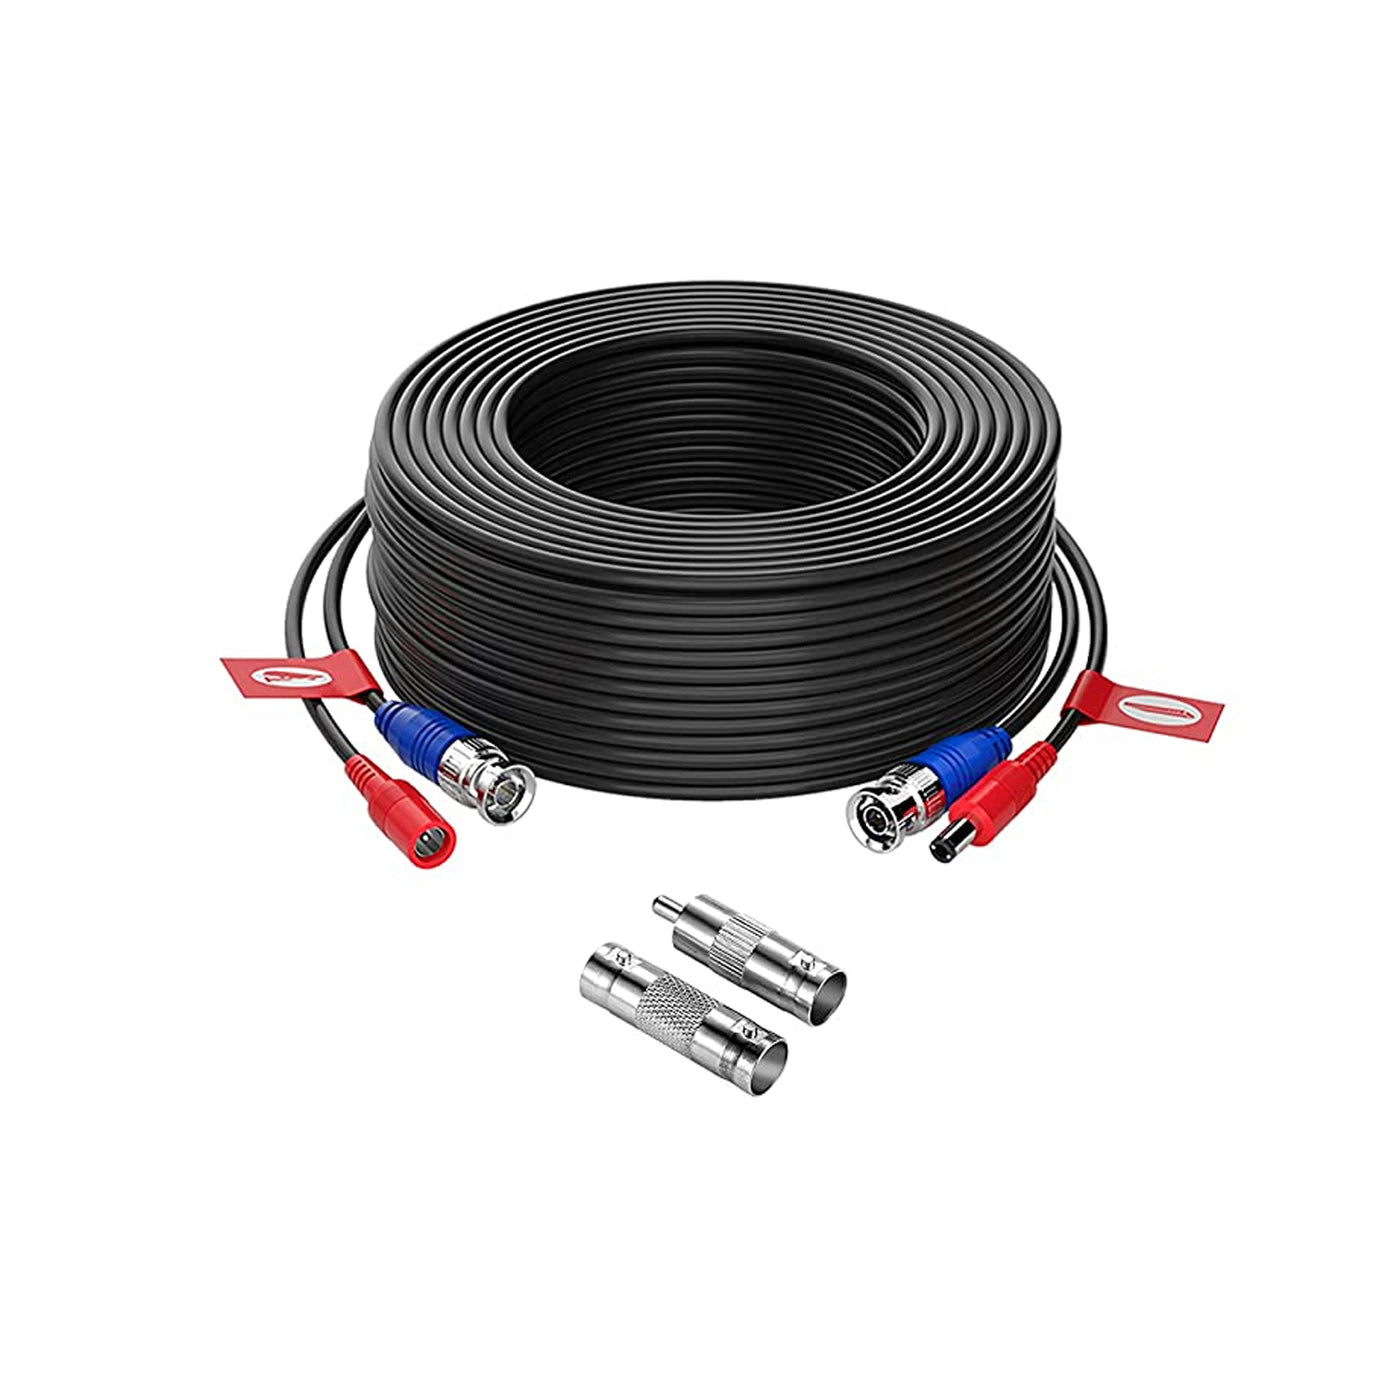 96Ft BNC Cable BNC Vedio Power Cable Pre-Made Al-in-One Camera Video BNC Cable Wire Cord for Surveillance CCTV Security System with Connectors(BNC Female and BNC to RCA)